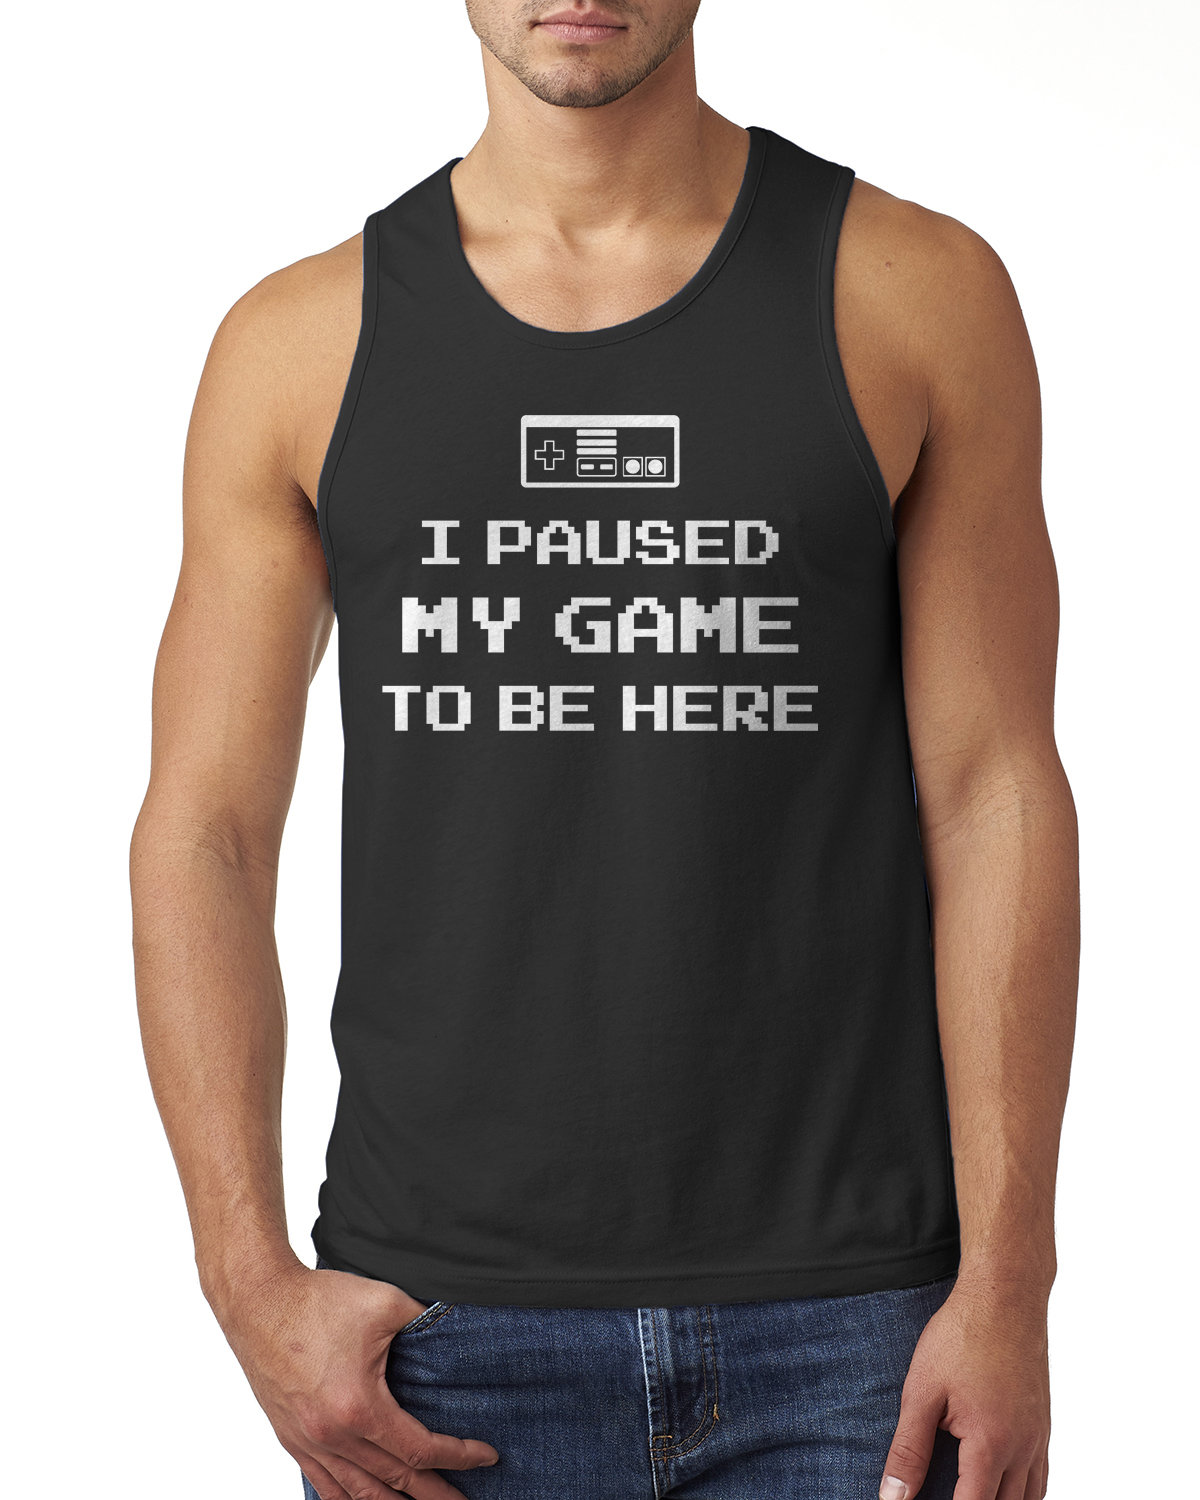 Statement Top for The Introverted Gamer 